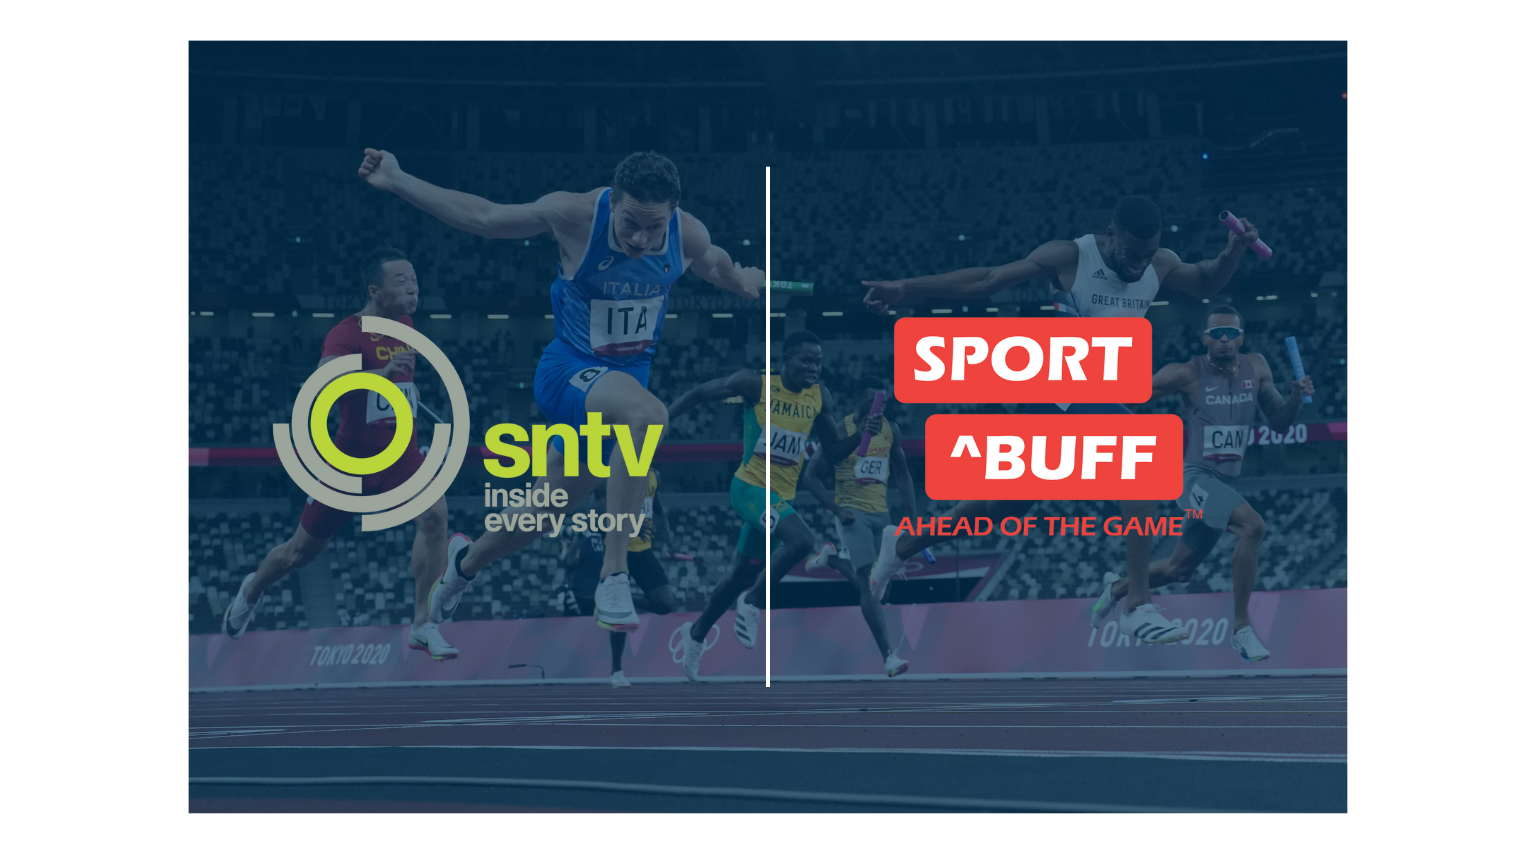 SNTV partners with Sport Buff to create sports fan engagement solutions 